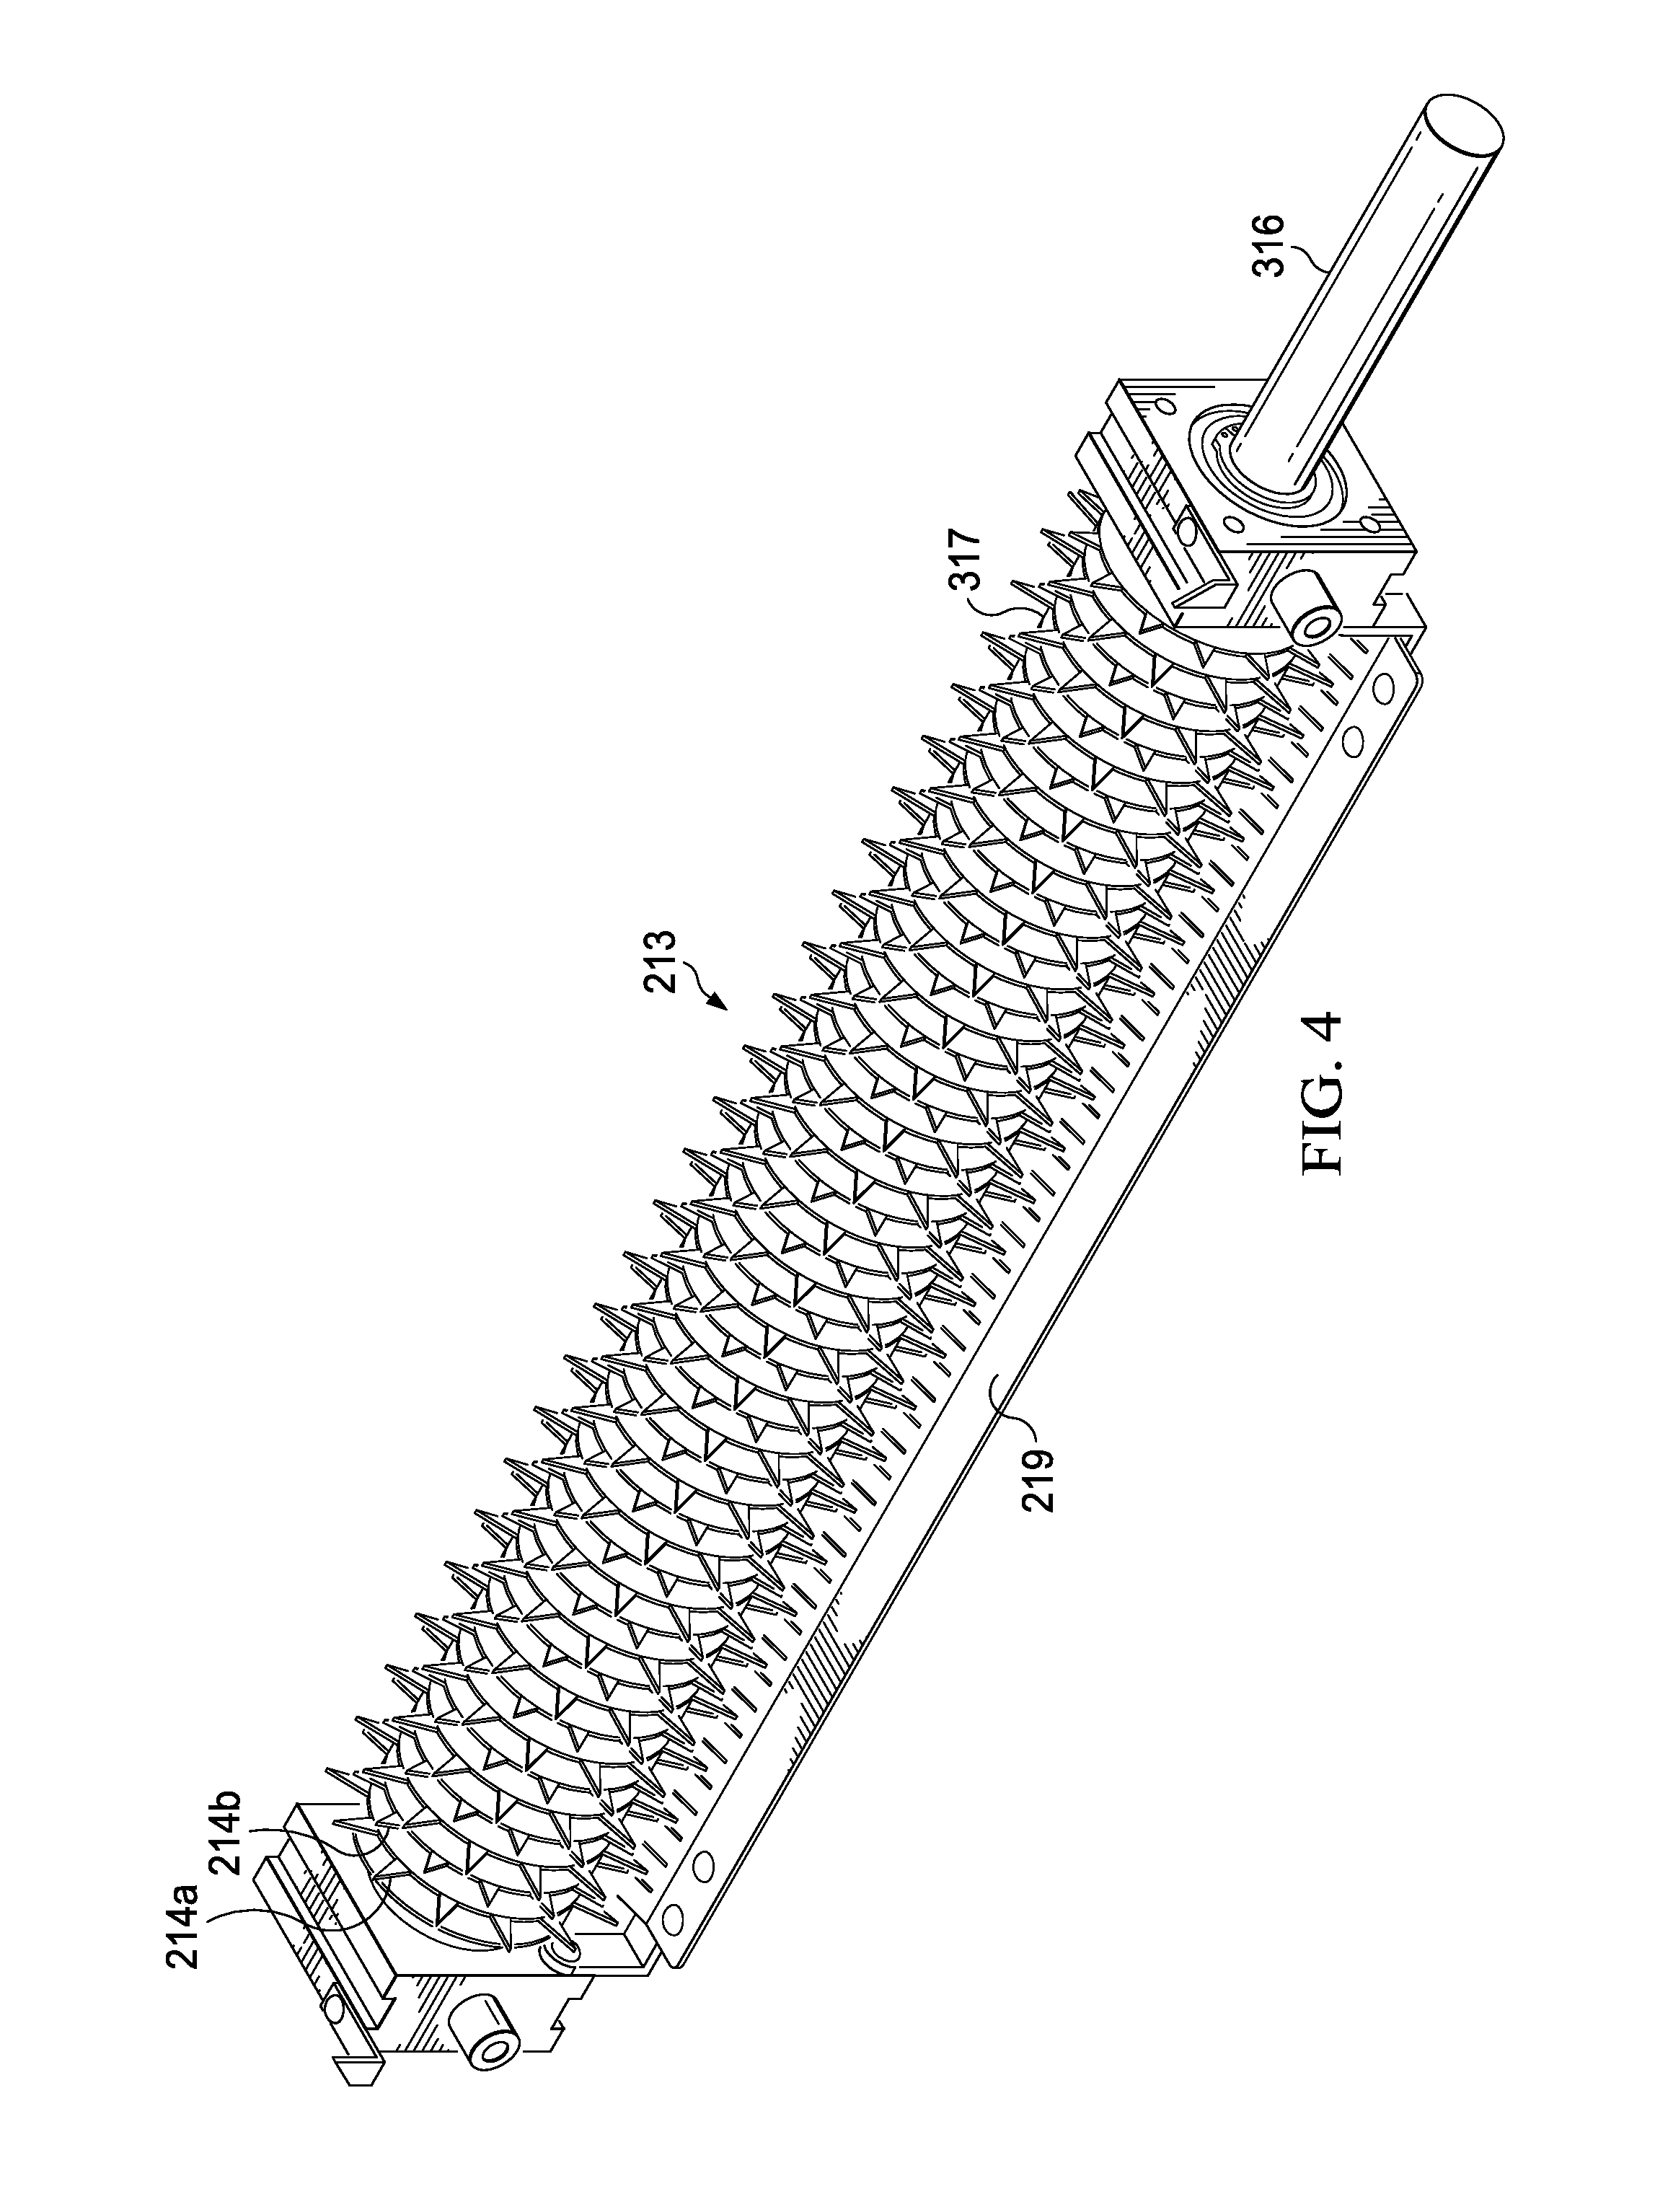 System and apparatus for controlling blistering